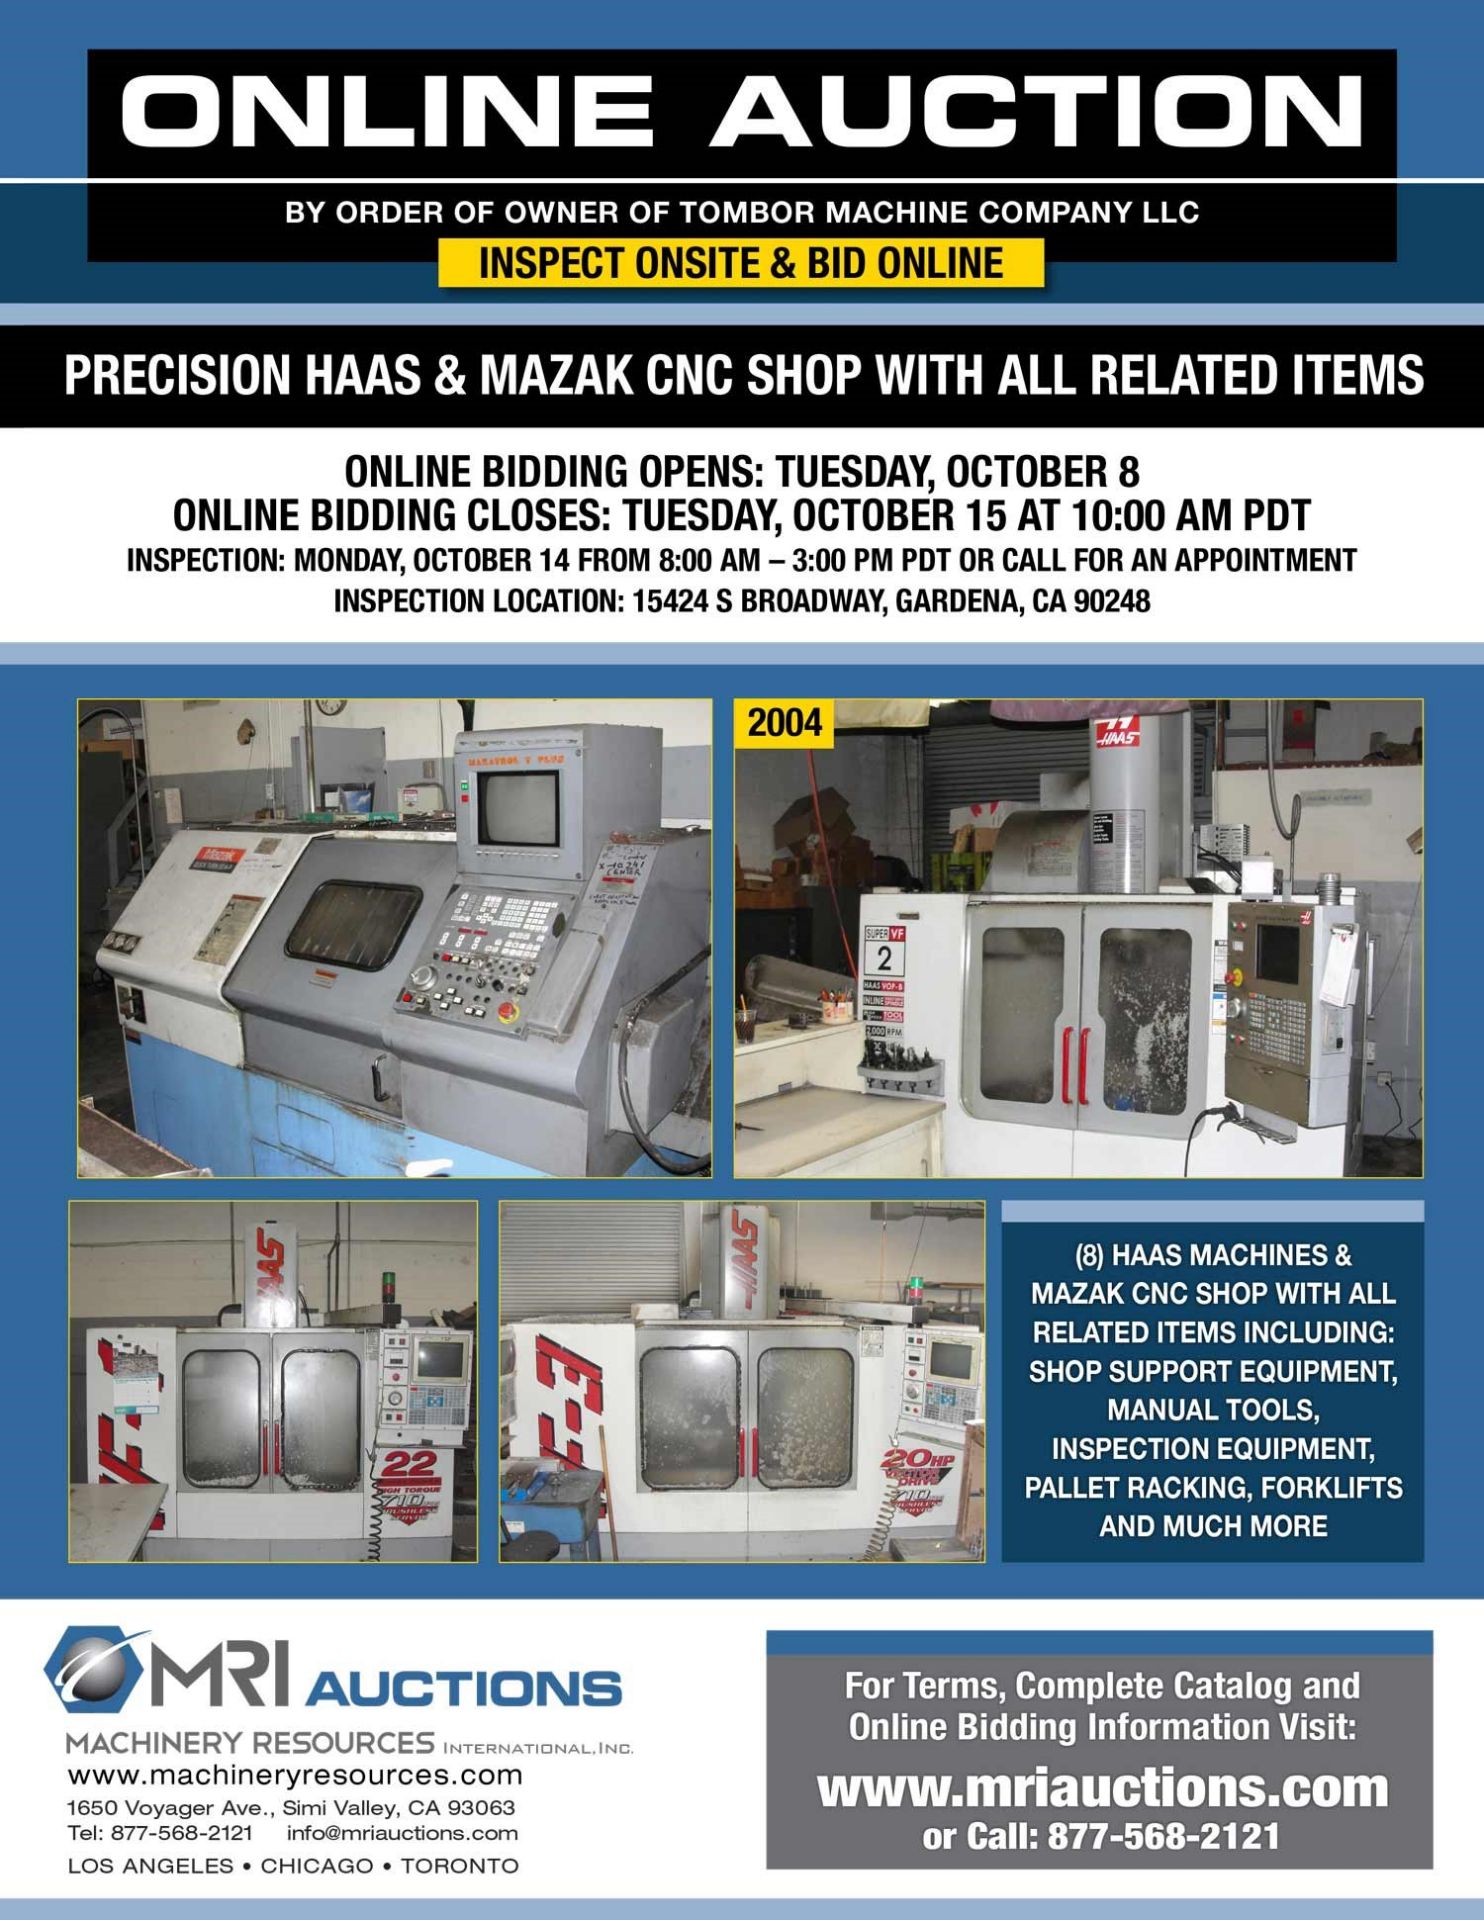 FEATURING: (8) HAAS MACHINES & MAZAK CNC SHOP WITH ALL RELATED ITEMS, INSPECTION & SUPPORT EQUIPMENT